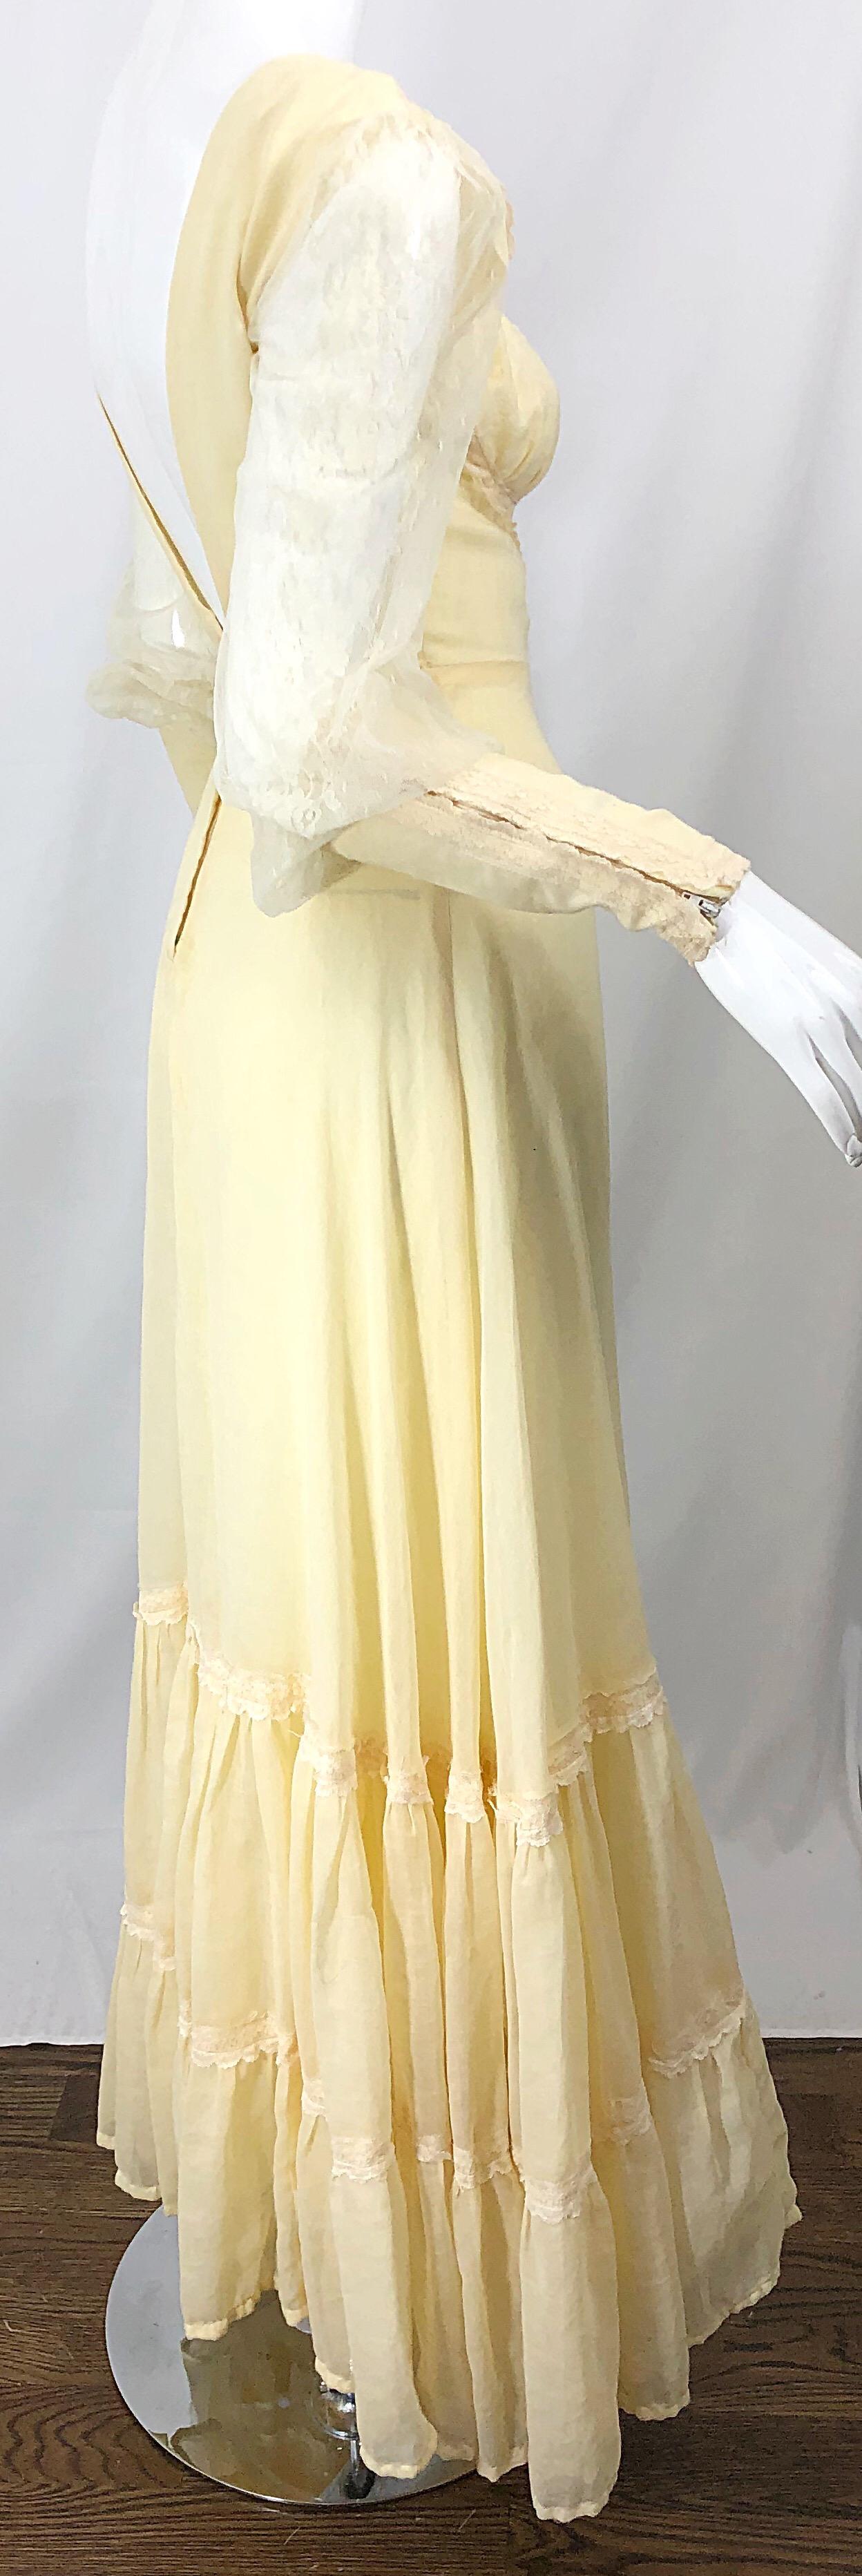 1970s Victorian Inspired Pale Yellow Cotton Voile + Lace Peasant 70s Maxi Dress In Excellent Condition For Sale In San Diego, CA